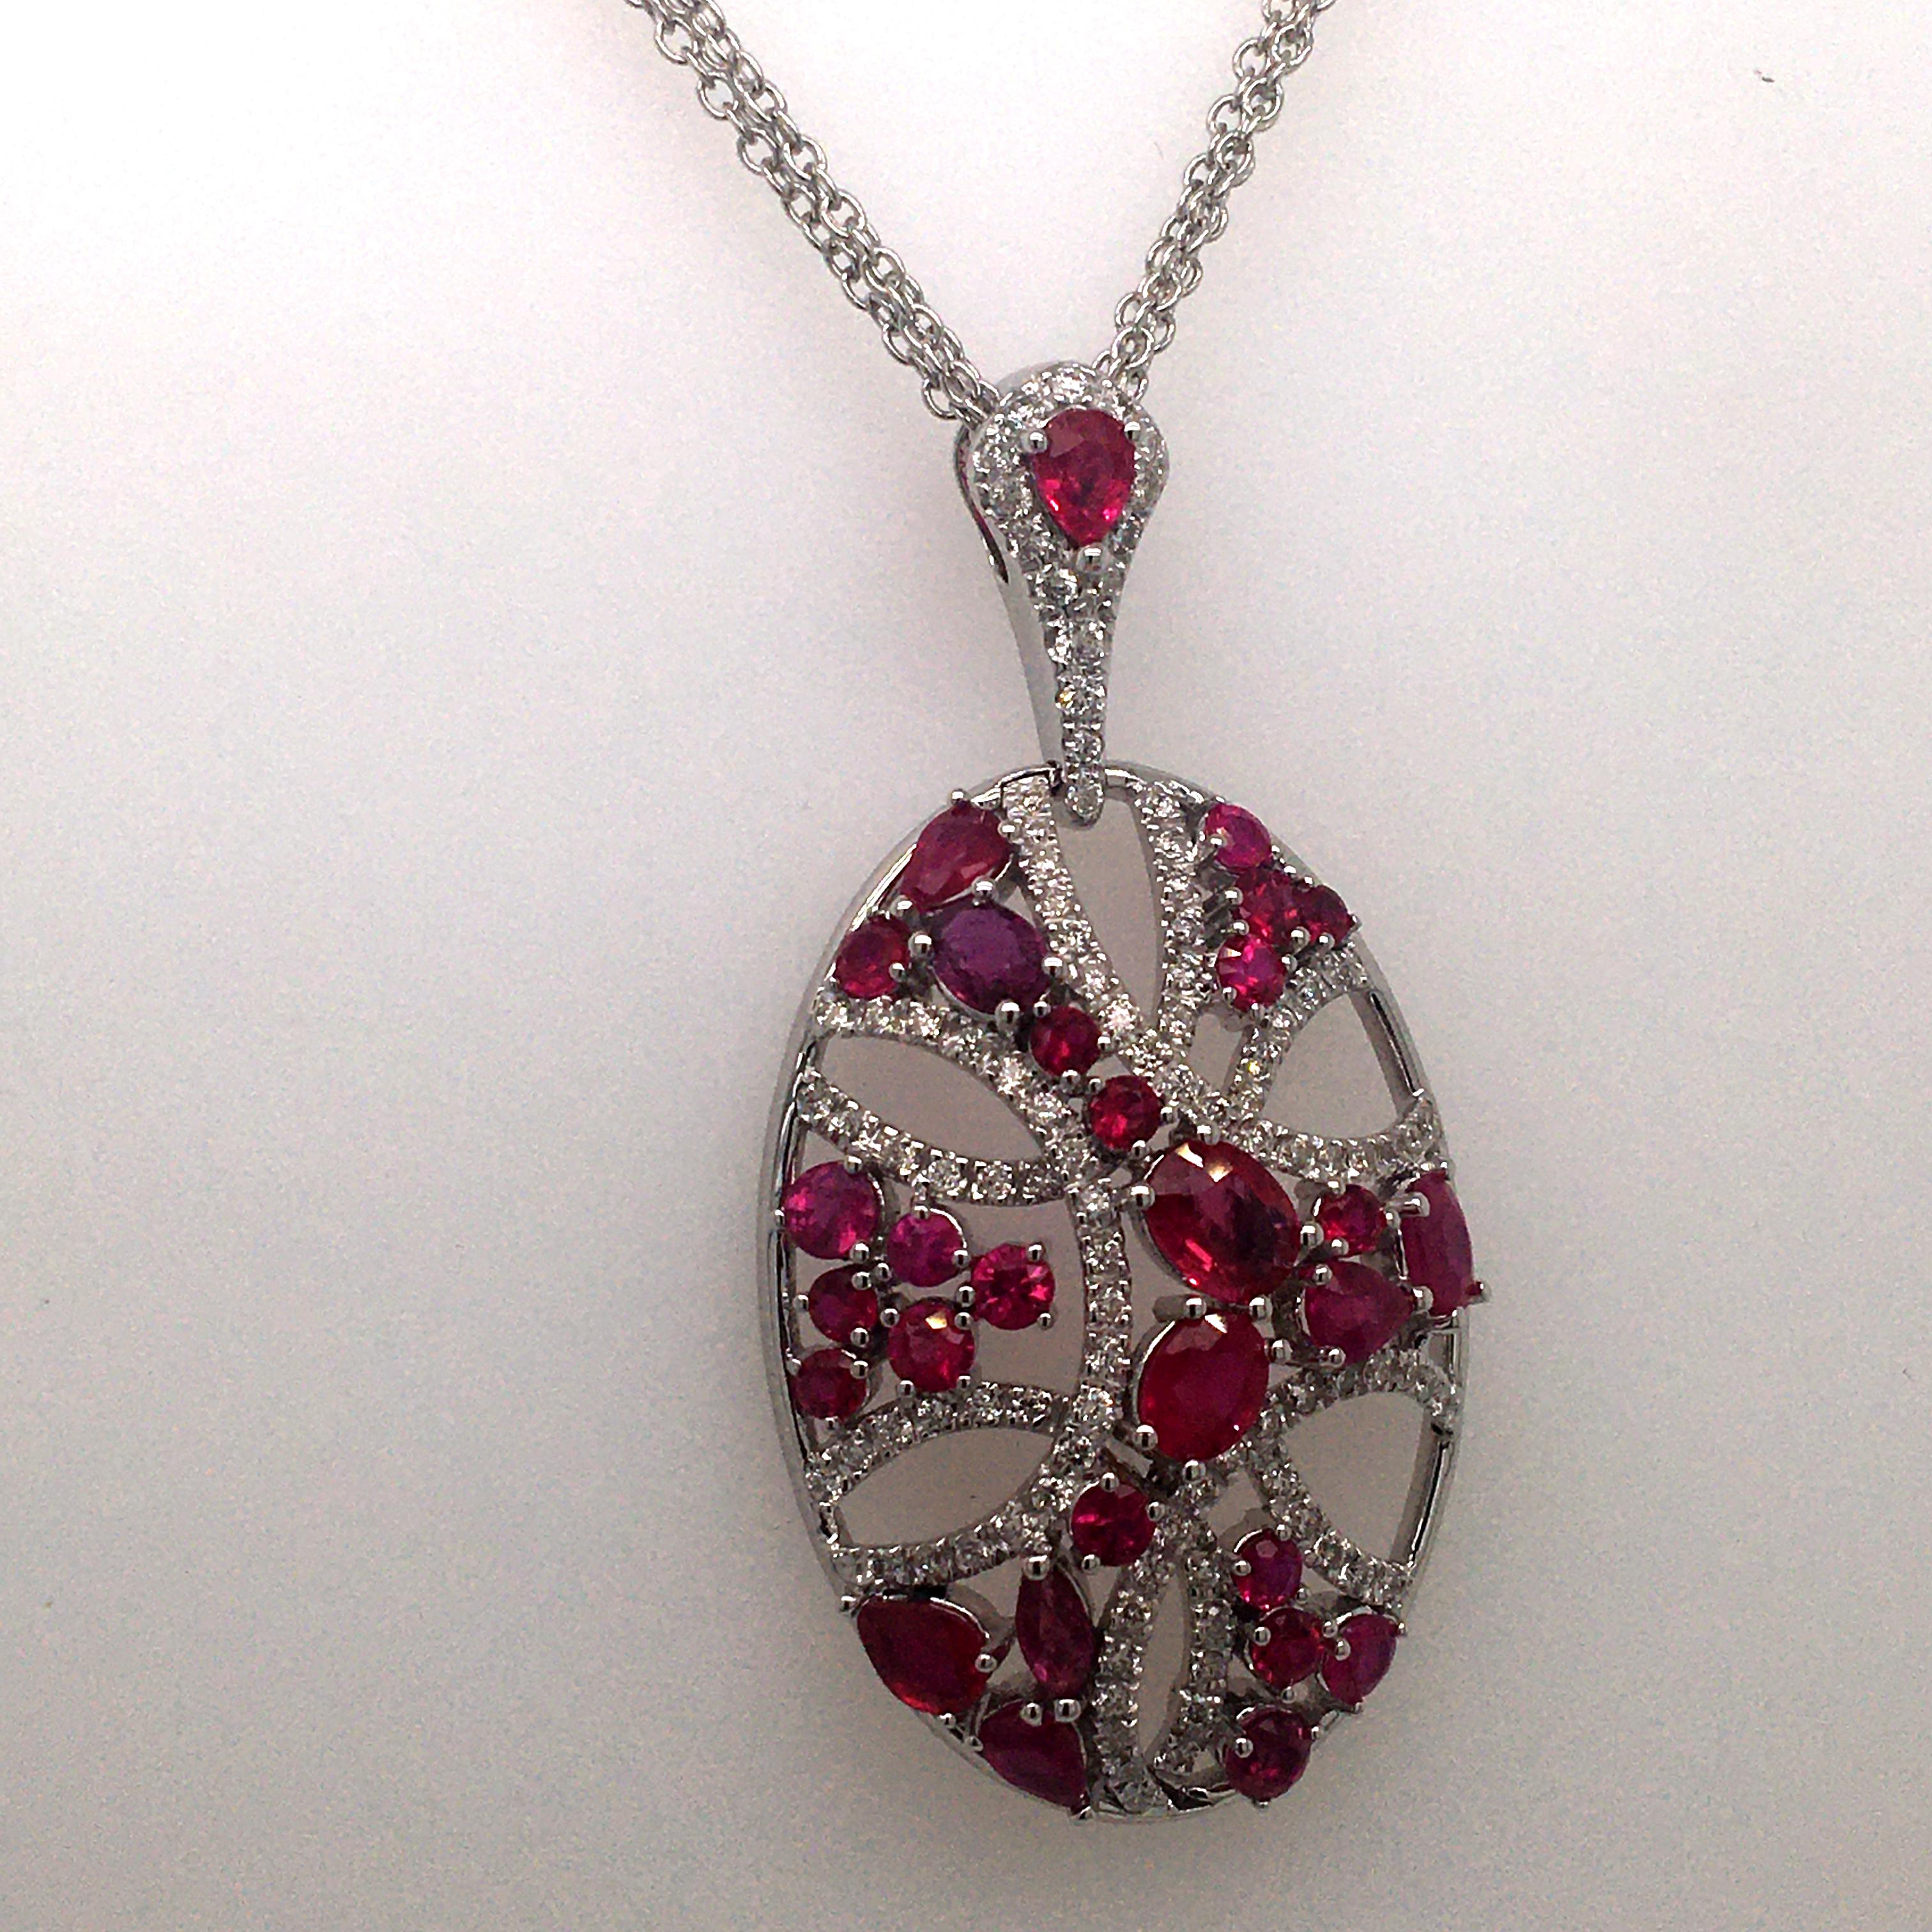 18 Karat white gold pendent set with 0.58 cts of Diamonds round cut Color G  clarity  VS  and 3.78 Cts of  multishape ruby, multichain  50 CM.
pendent only 4.2 CM, Made in Italy comes in a box,very nice movement given by the ruby stones, ruby are